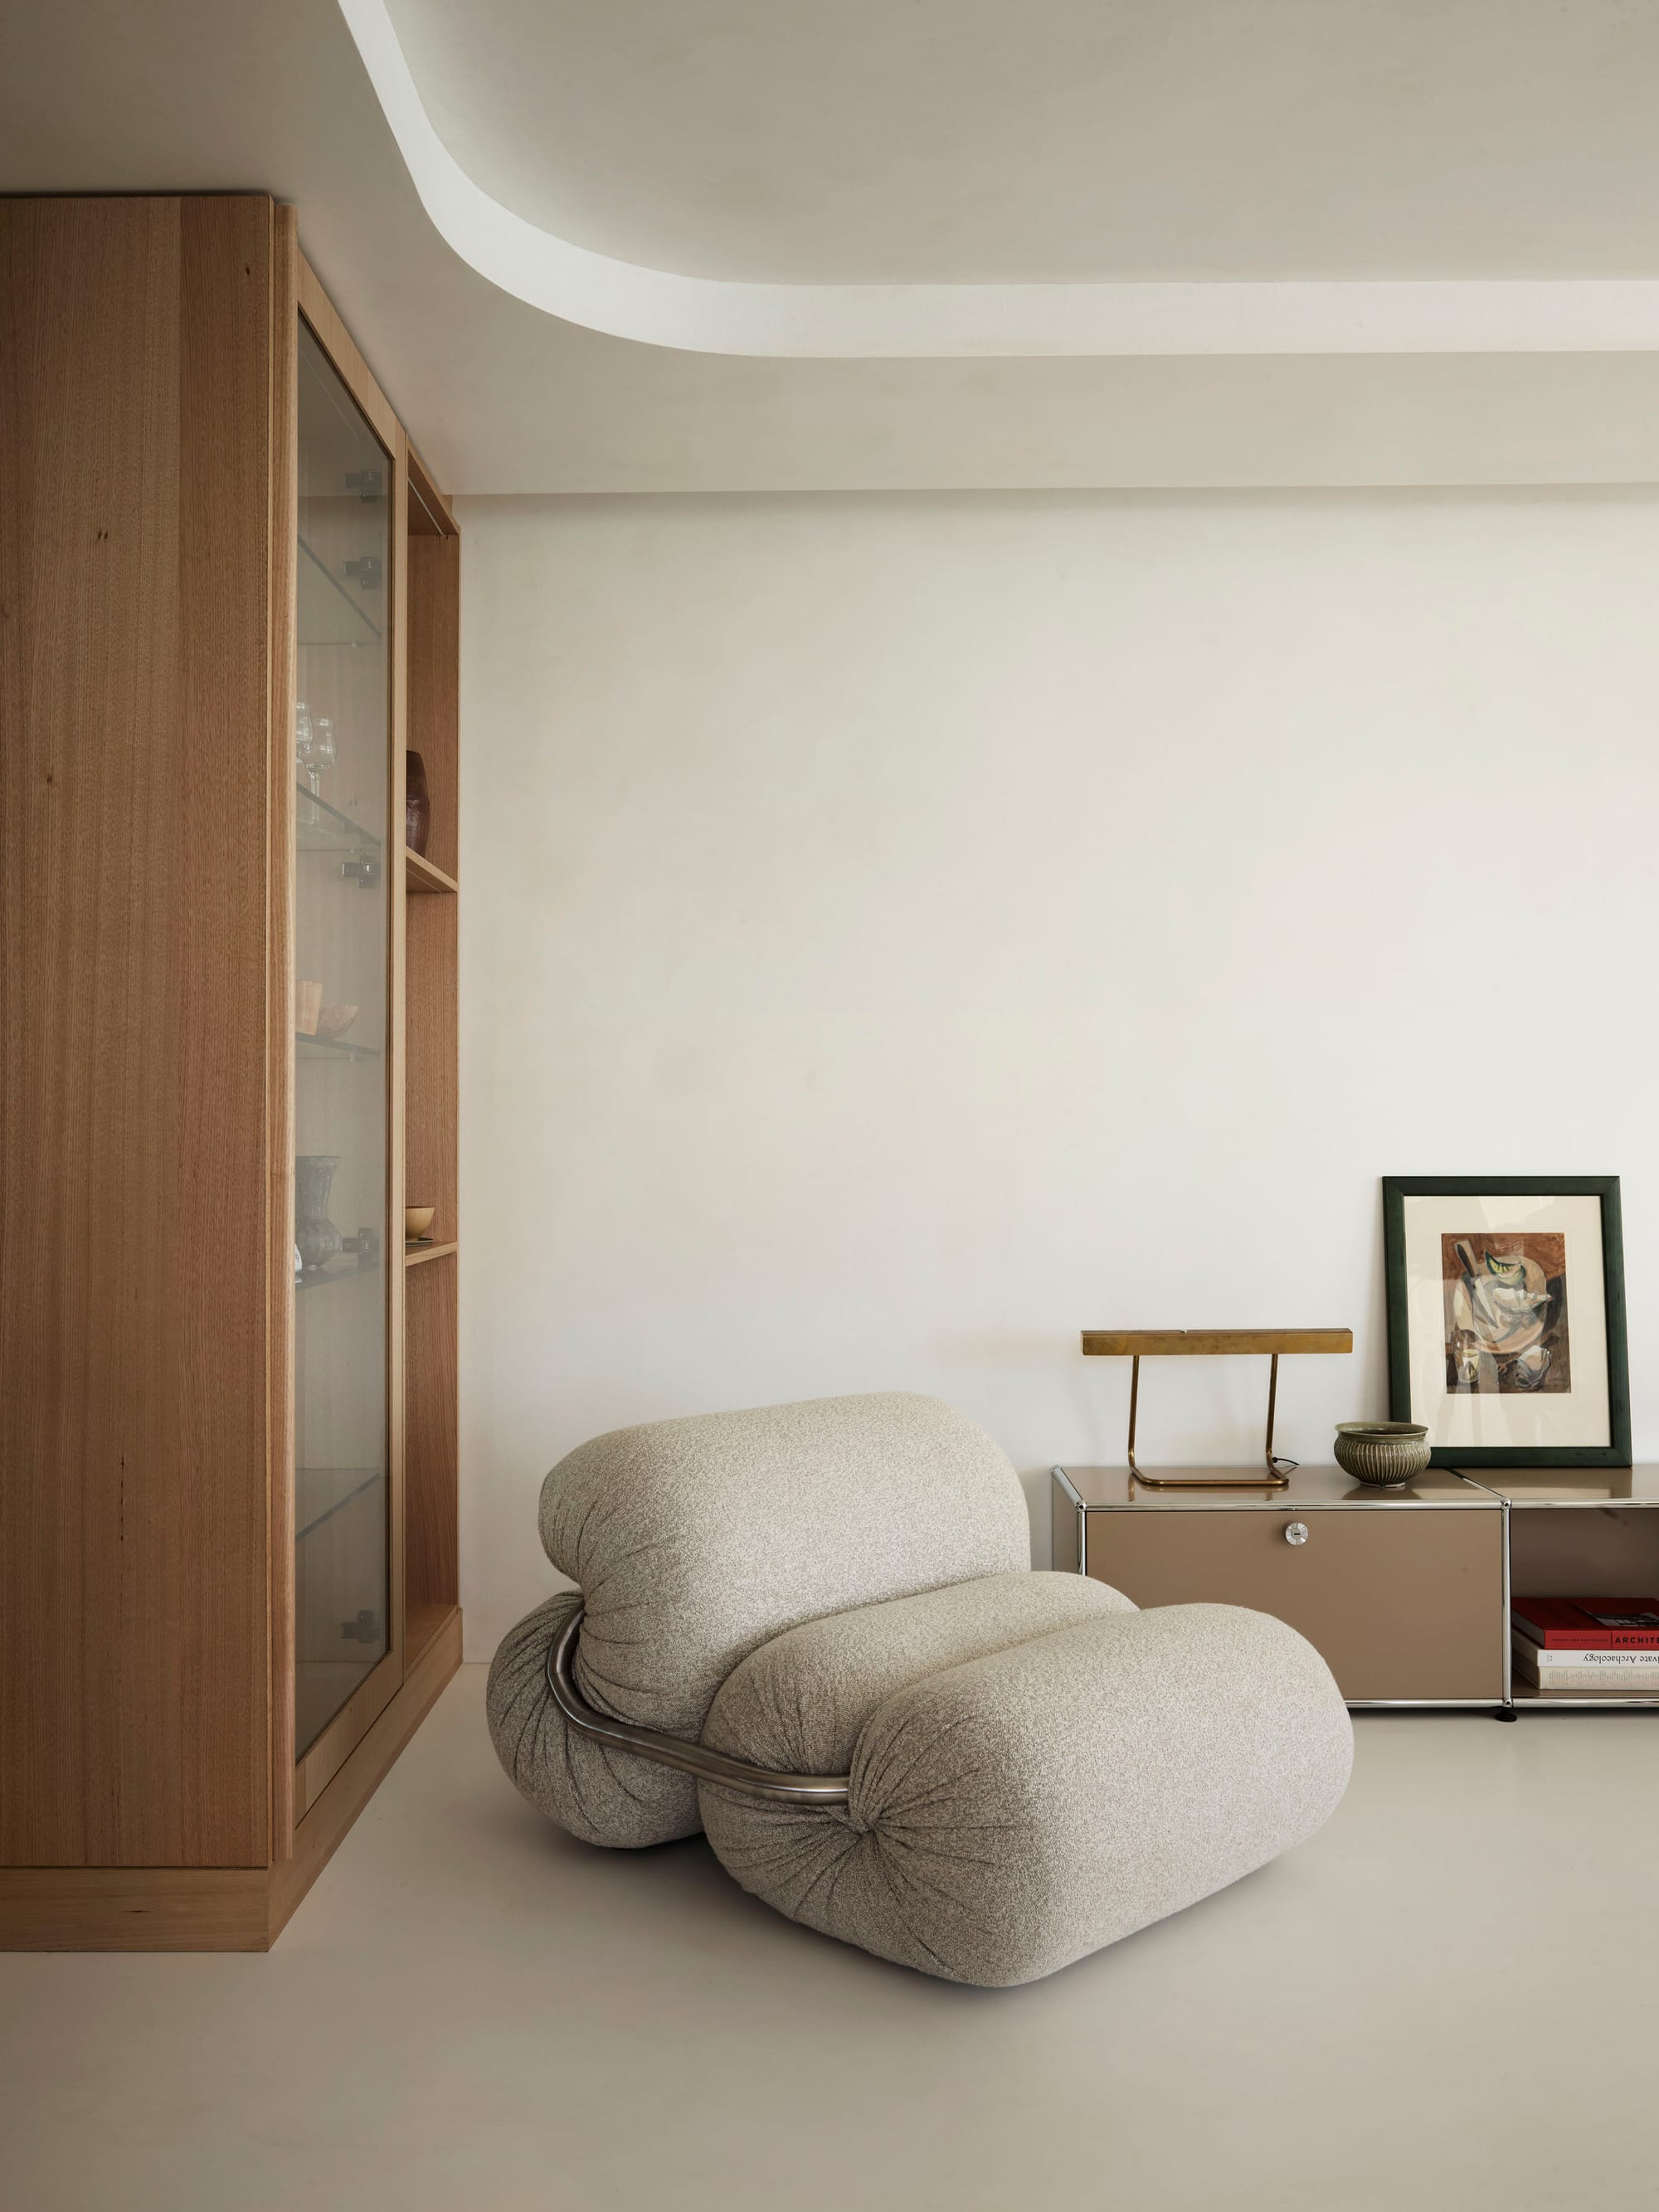 Tasmanian Timber Series: Darling Point Apartment. Photography by Ansen Smart. Vertical shot of neutral, boucle curved airmchair. White neutral floor and walls. Tasmanian Oak cabinetry on left hand side of image. 